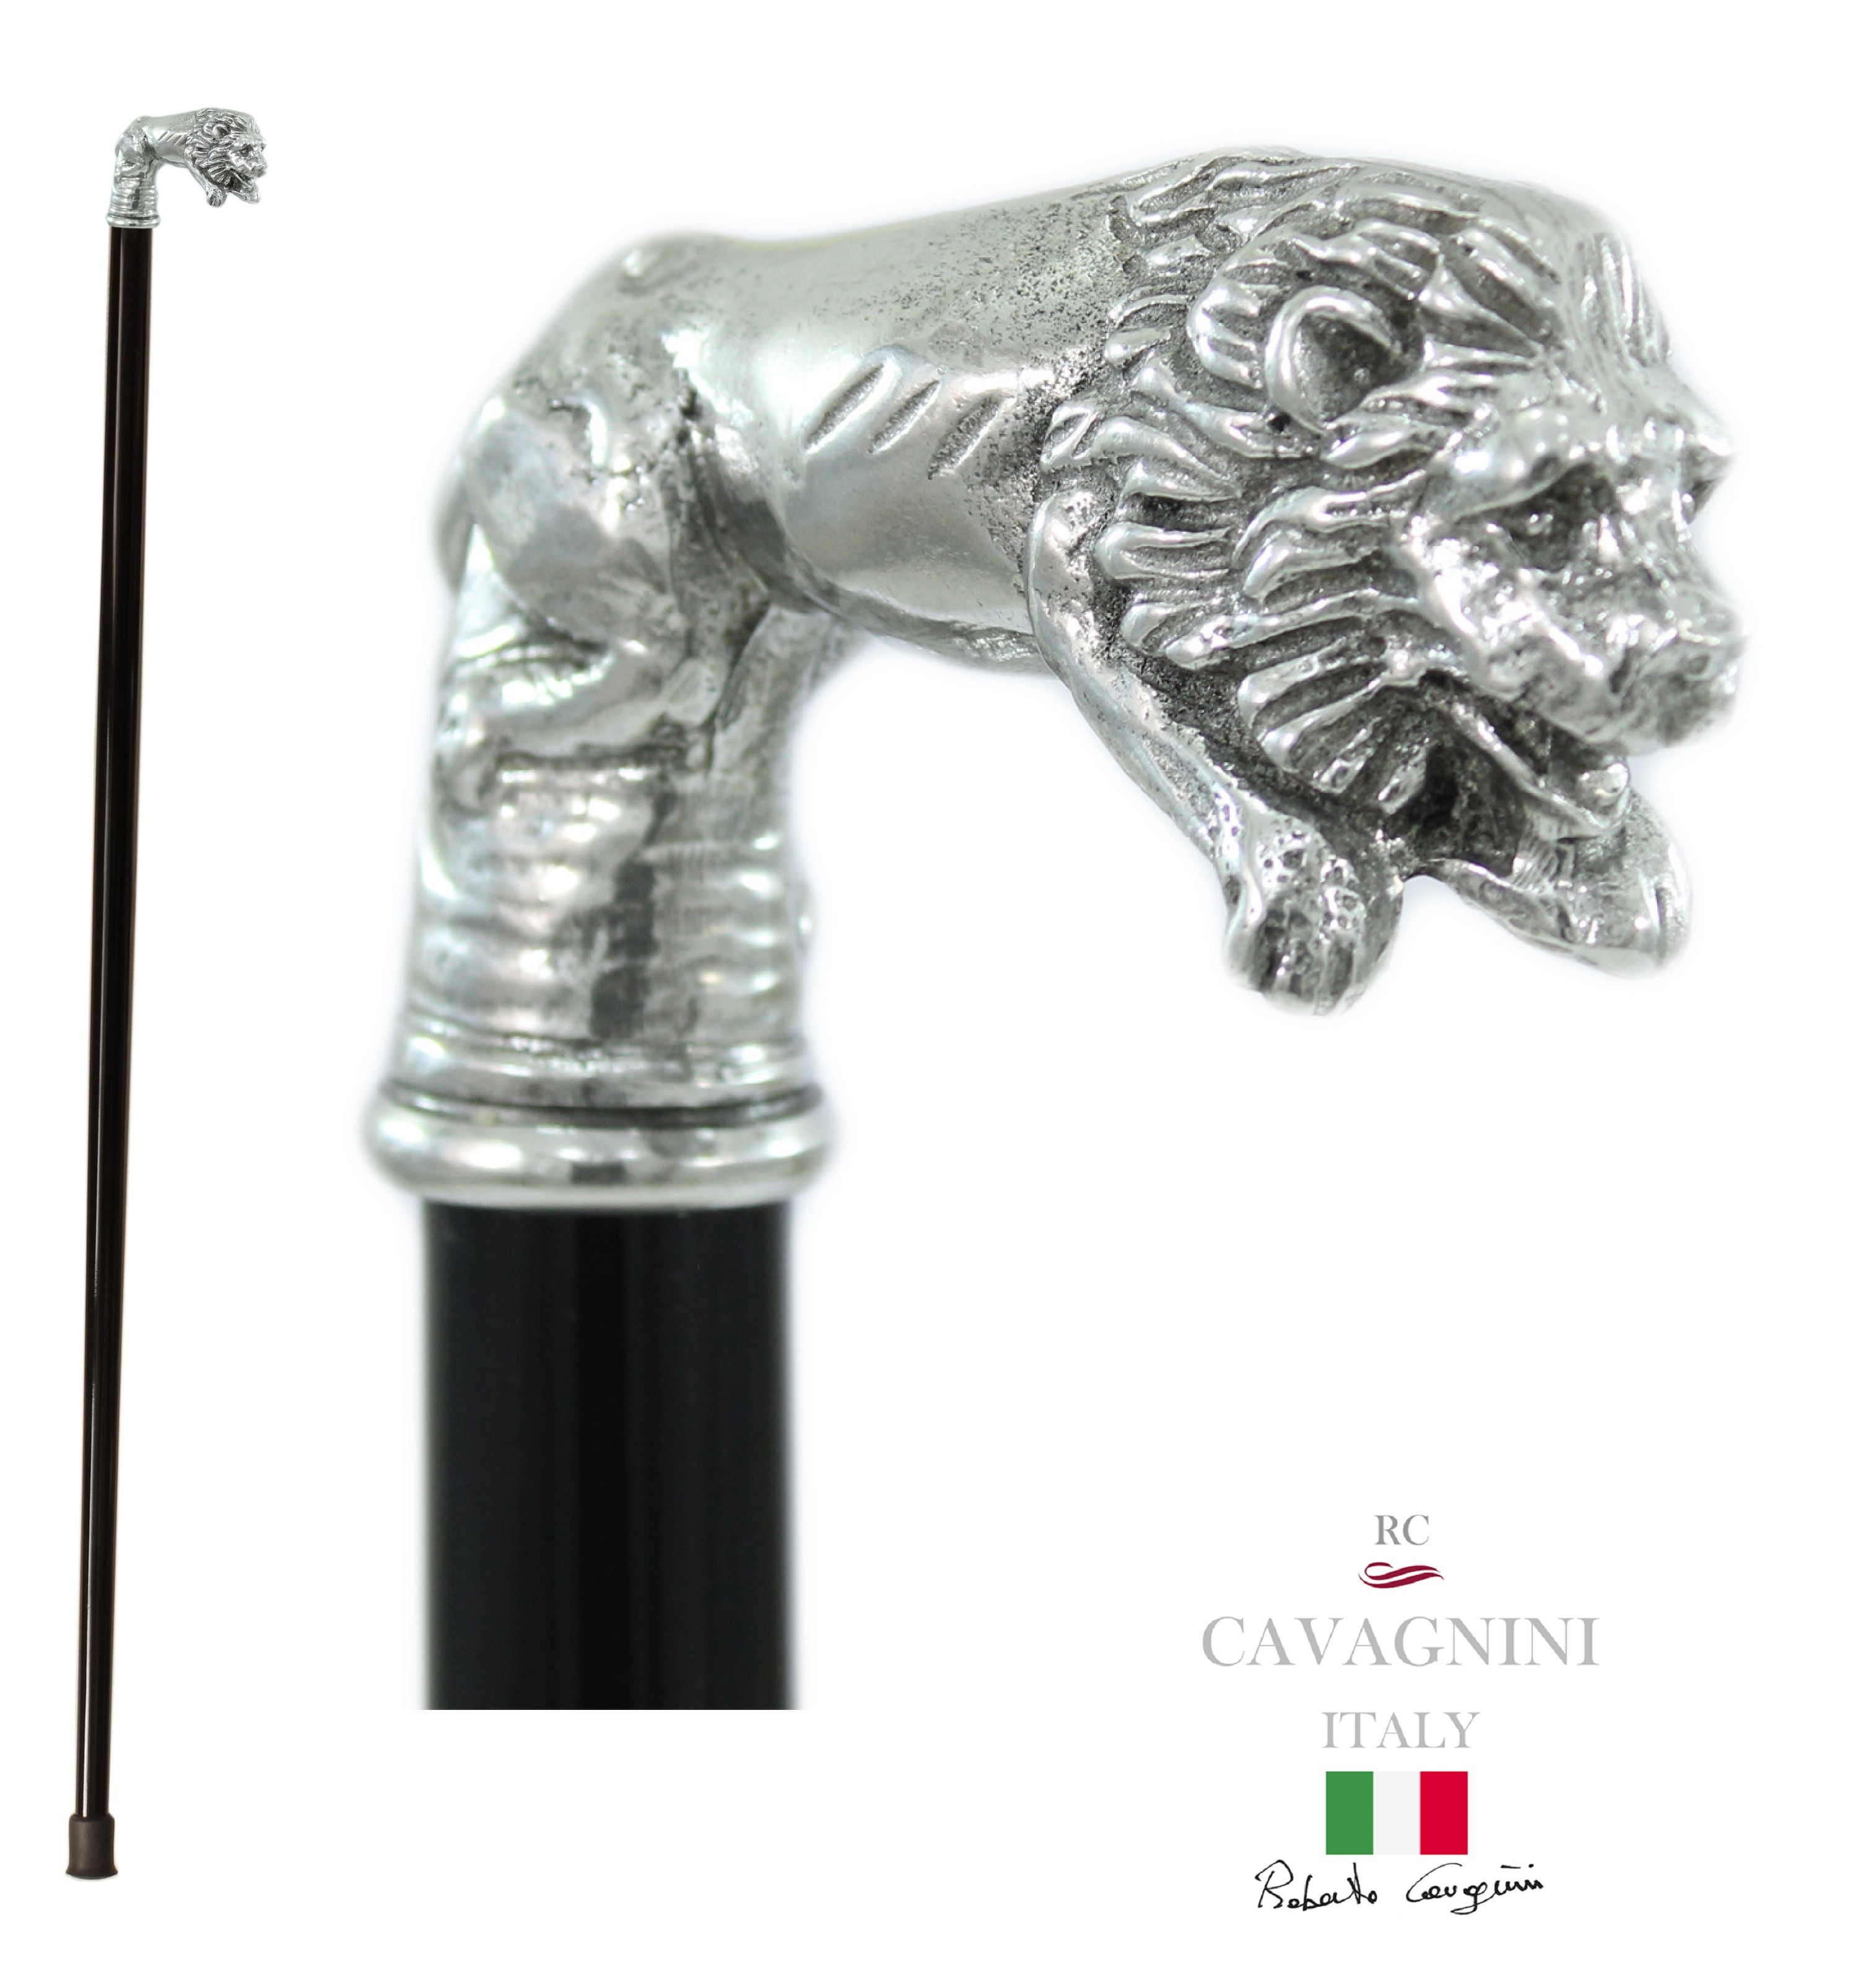 BLACK FRIDAY Wood walking sticks fon men CAVAGNINI Metal Pewter Lion Little Head Black Medical Ornament Women Gift for old people made in italy 